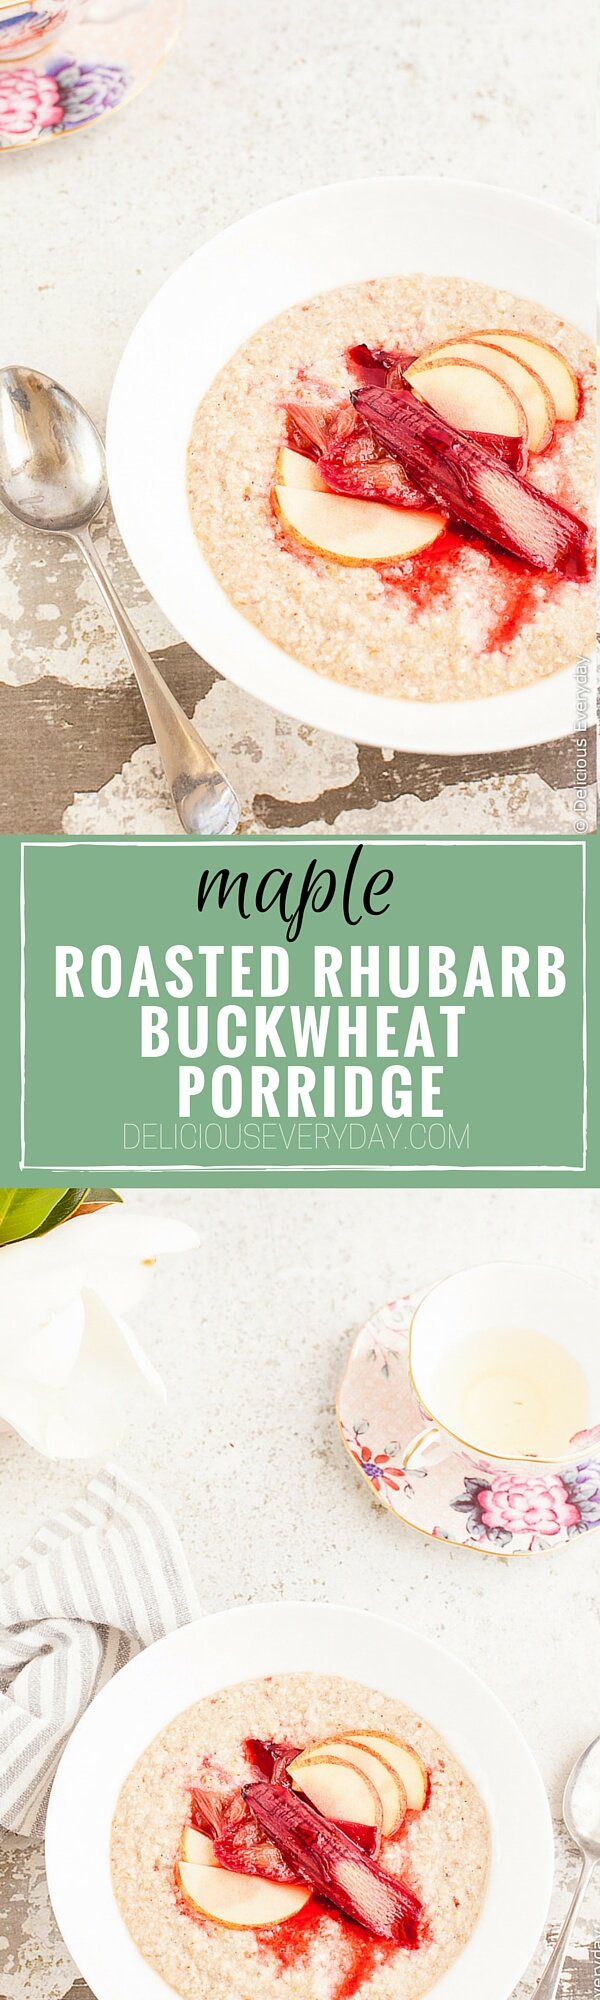 Maple Roasted Rhubarb Buckwheat Porridge Recipe - Ruby hued rhubarb is roasted in maple syrup until soft and luscious and served on a bed of apple buckwheat porridge for a healthy and satisfying way to start your day. | click for the recipe